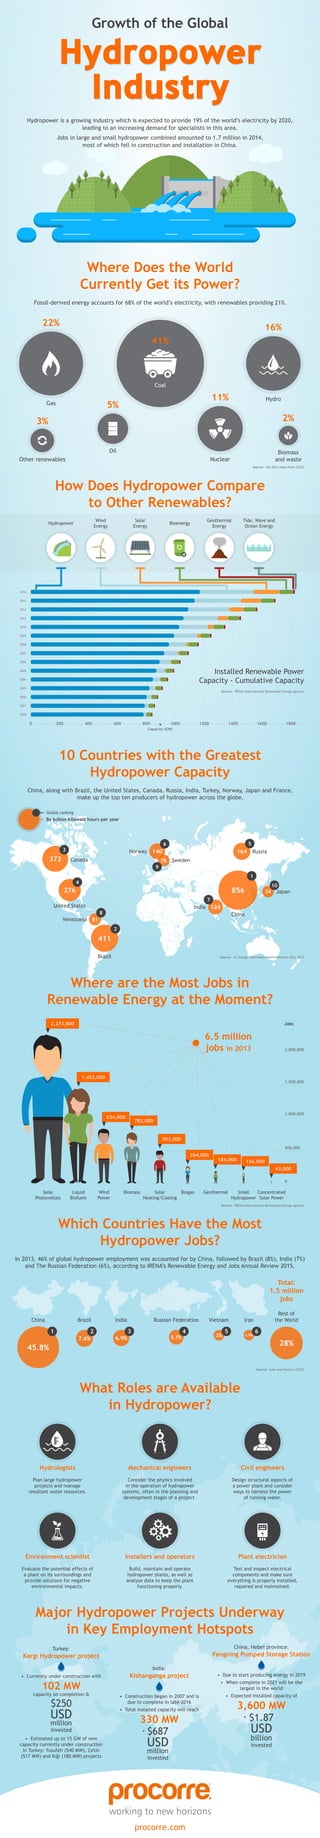 Hydropower
Industry
Hydropower
Industry
Hydropower is a growing industry which is expected to provide 19% of the world’s electricity by 2020,
leading to an increasing demand for specialists in this area.
Jobs in large and small hydropower combined amounted to 1.7 million in 2014,
most of which fell in construction and installation in China.
Growth of the Global
Where Does the World
Currently Get its Power?
Fossil-derived energy accounts for 68% of the world’s electricity, with renewables providing 21%.
Source: IEA 2014 (data from 2012)
5%
Oil
Gas
22%
41%
Coal
11%
Nuclear
2%
Biomass
and waste
3%
Other renewables
16%
Hydro
How Does Hydropower Compare
to Other Renewables?
Installed Renewable Power
Capacity - Cumulative Capacity
Source: IRENA (International Renewable Energy Agency)
2014
2013
2012
2011
2010
2009
2008
2007
2006
2005
2004
2003
2002
2001
2000
0 200 400 600 800 1000 1200 1400 1600 1800
Capacity (GW)
Hydropower
Wind
Energy
Solar
Energy
Bioenergy
Geothermal
Energy
Tide, Wave and
Ocean Energy
10 Countries with the Greatest
Hydropower Capacity
China, along with Brazil, the United States, Canada, Russia, India, Turkey, Norway, Japan and France,
make up the top ten producers of hydropower across the globe.
Source: US Energy Information Administration (EIA) 2012
China
856
1
Brazil
411
2
Canada373
3
Global ranking
By billion kilowatt hours per year
United States
276
4
Russia164
5
Norway 140
6
India 124
7
Venezuela 81
8
Sweden78
9
Japan74
10
Where are the Most Jobs in
Renewable Energy at the Moment?
Source: IRENA (International Renewable Energy Agency)
500,000
0
1,000,000
1,500,000
2,000,000
Jobs2,273,000
1,453,000
834,000
782,000
503,000
264,000
184,000 156,000
43,000
Solar
Photovoltaic
Liquid
Biofuels
Wind
Power
Biomass Solar
Heating/Cooling
Biogas Geothermal Small
Hydropower
Concentrated
Solar Power
6.5 million
jobs in 2013
In 2013, 46% of global hydropower employment was accounted for by China, followed by Brazil (8%), India (7%)
and The Russian Federation (6%), according to IRENA’s Renewable Energy and Jobs Annual Review 2015.
Source: Lehr and Nieters (2015)
28%
Rest of
the World
Total:
1.5 million
jobs
China
45.8%
1
Brazil
7.6%
2
India
6.9%
3
Russian Federation
5.7%
4
Vietnam
3%
5
Iran
2.9%
6
Which Countries Have the Most
Hydropower Jobs?
Major Hydropower Projects Underway
in Key Employment Hotspots
• Due to start producing energy in 2019
• When complete in 2021 will be the
largest in the world
• Expected installed capacity of
3,600 MW
China, Hebei province:
Fengning Pumped Storage Station
Turkey:
Kargı Hydropower project
• Currently under construction with
102 MW
capacity on completion &
• Estimated up to 15 GW of new
capacity currently under construction
in Turkey: Yusufeli (540 MW), Çetin
(517 MW) and Kığı (180 MW) projects
• Construction began in 2007 and is
due to complete in late-2016
• Total installed capacity will reach
330 MW
•
•
India:
Kishanganga project
$250
USD
million
invested
$687
USD
million
invested
$1.87
USD
billion
invested
What Roles are Available
in Hydropower?
Hydrologists
Plan large hydropower
projects and manage
resultant water resources.
Mechanical engineers
Consider the physics involved
in the operation of hydropower
systems, often in the planning and
development stages of a project.
Civil engineers
Design structural aspects of
a power plant and consider
ways to harness the power
of running water.
Environment scientist
Evaluate the potential effects of
a plant on its surroundings and
provide solutions for negative
environmental impacts.
Installers and operators
Build, maintain and operate
hydropower plants, as well as
analyse data to keep the plant
functioning properly.
Plant electrician
Test and inspect electrical
components and make sure
everything is properly installed,
repaired and maintained.
procorre.com
 